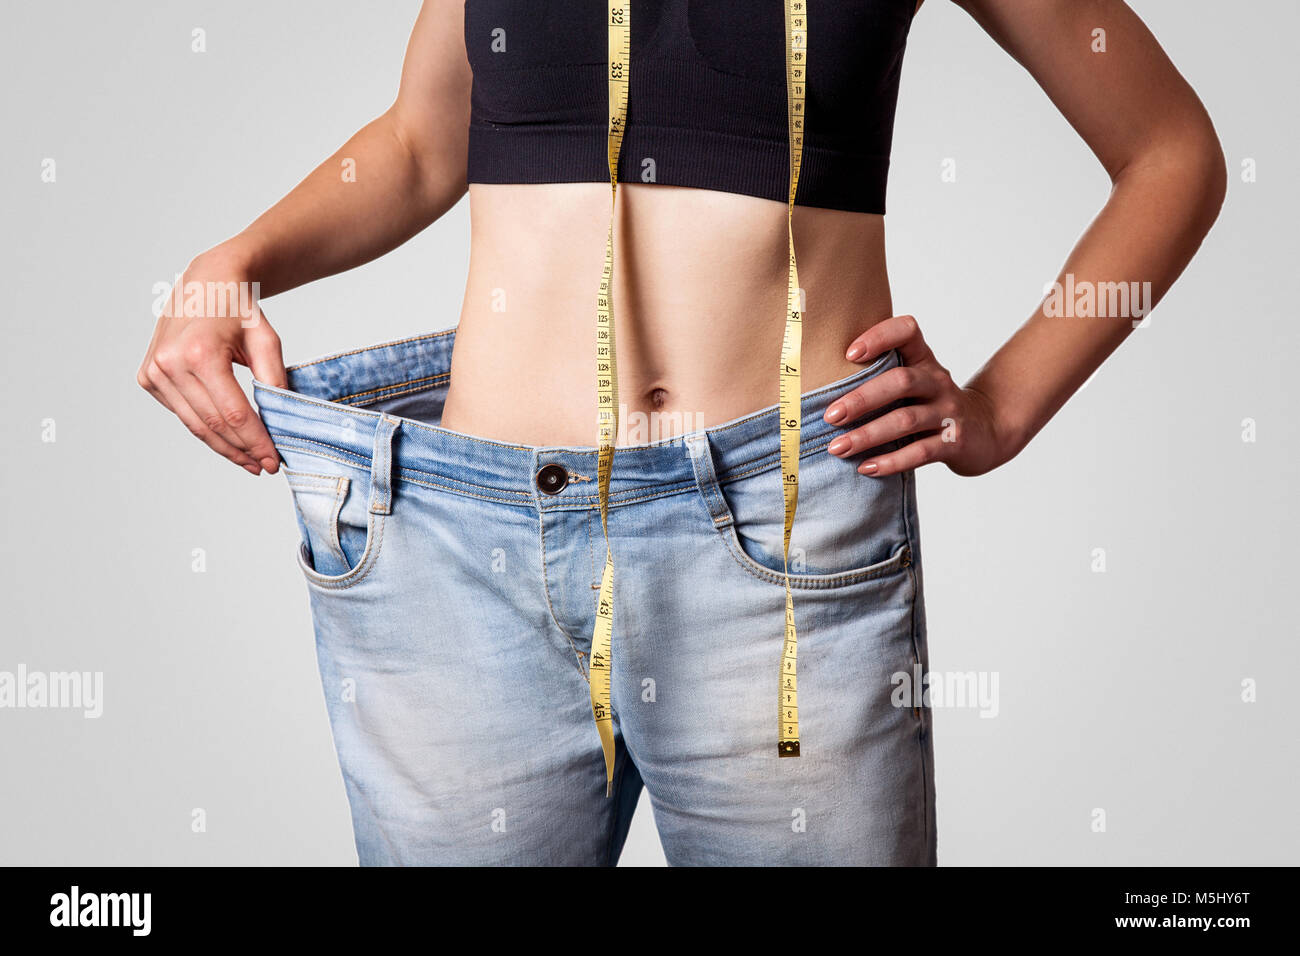 Women sitting wearing low cut trousers with underwear showing from the back  Stock Photo - Alamy